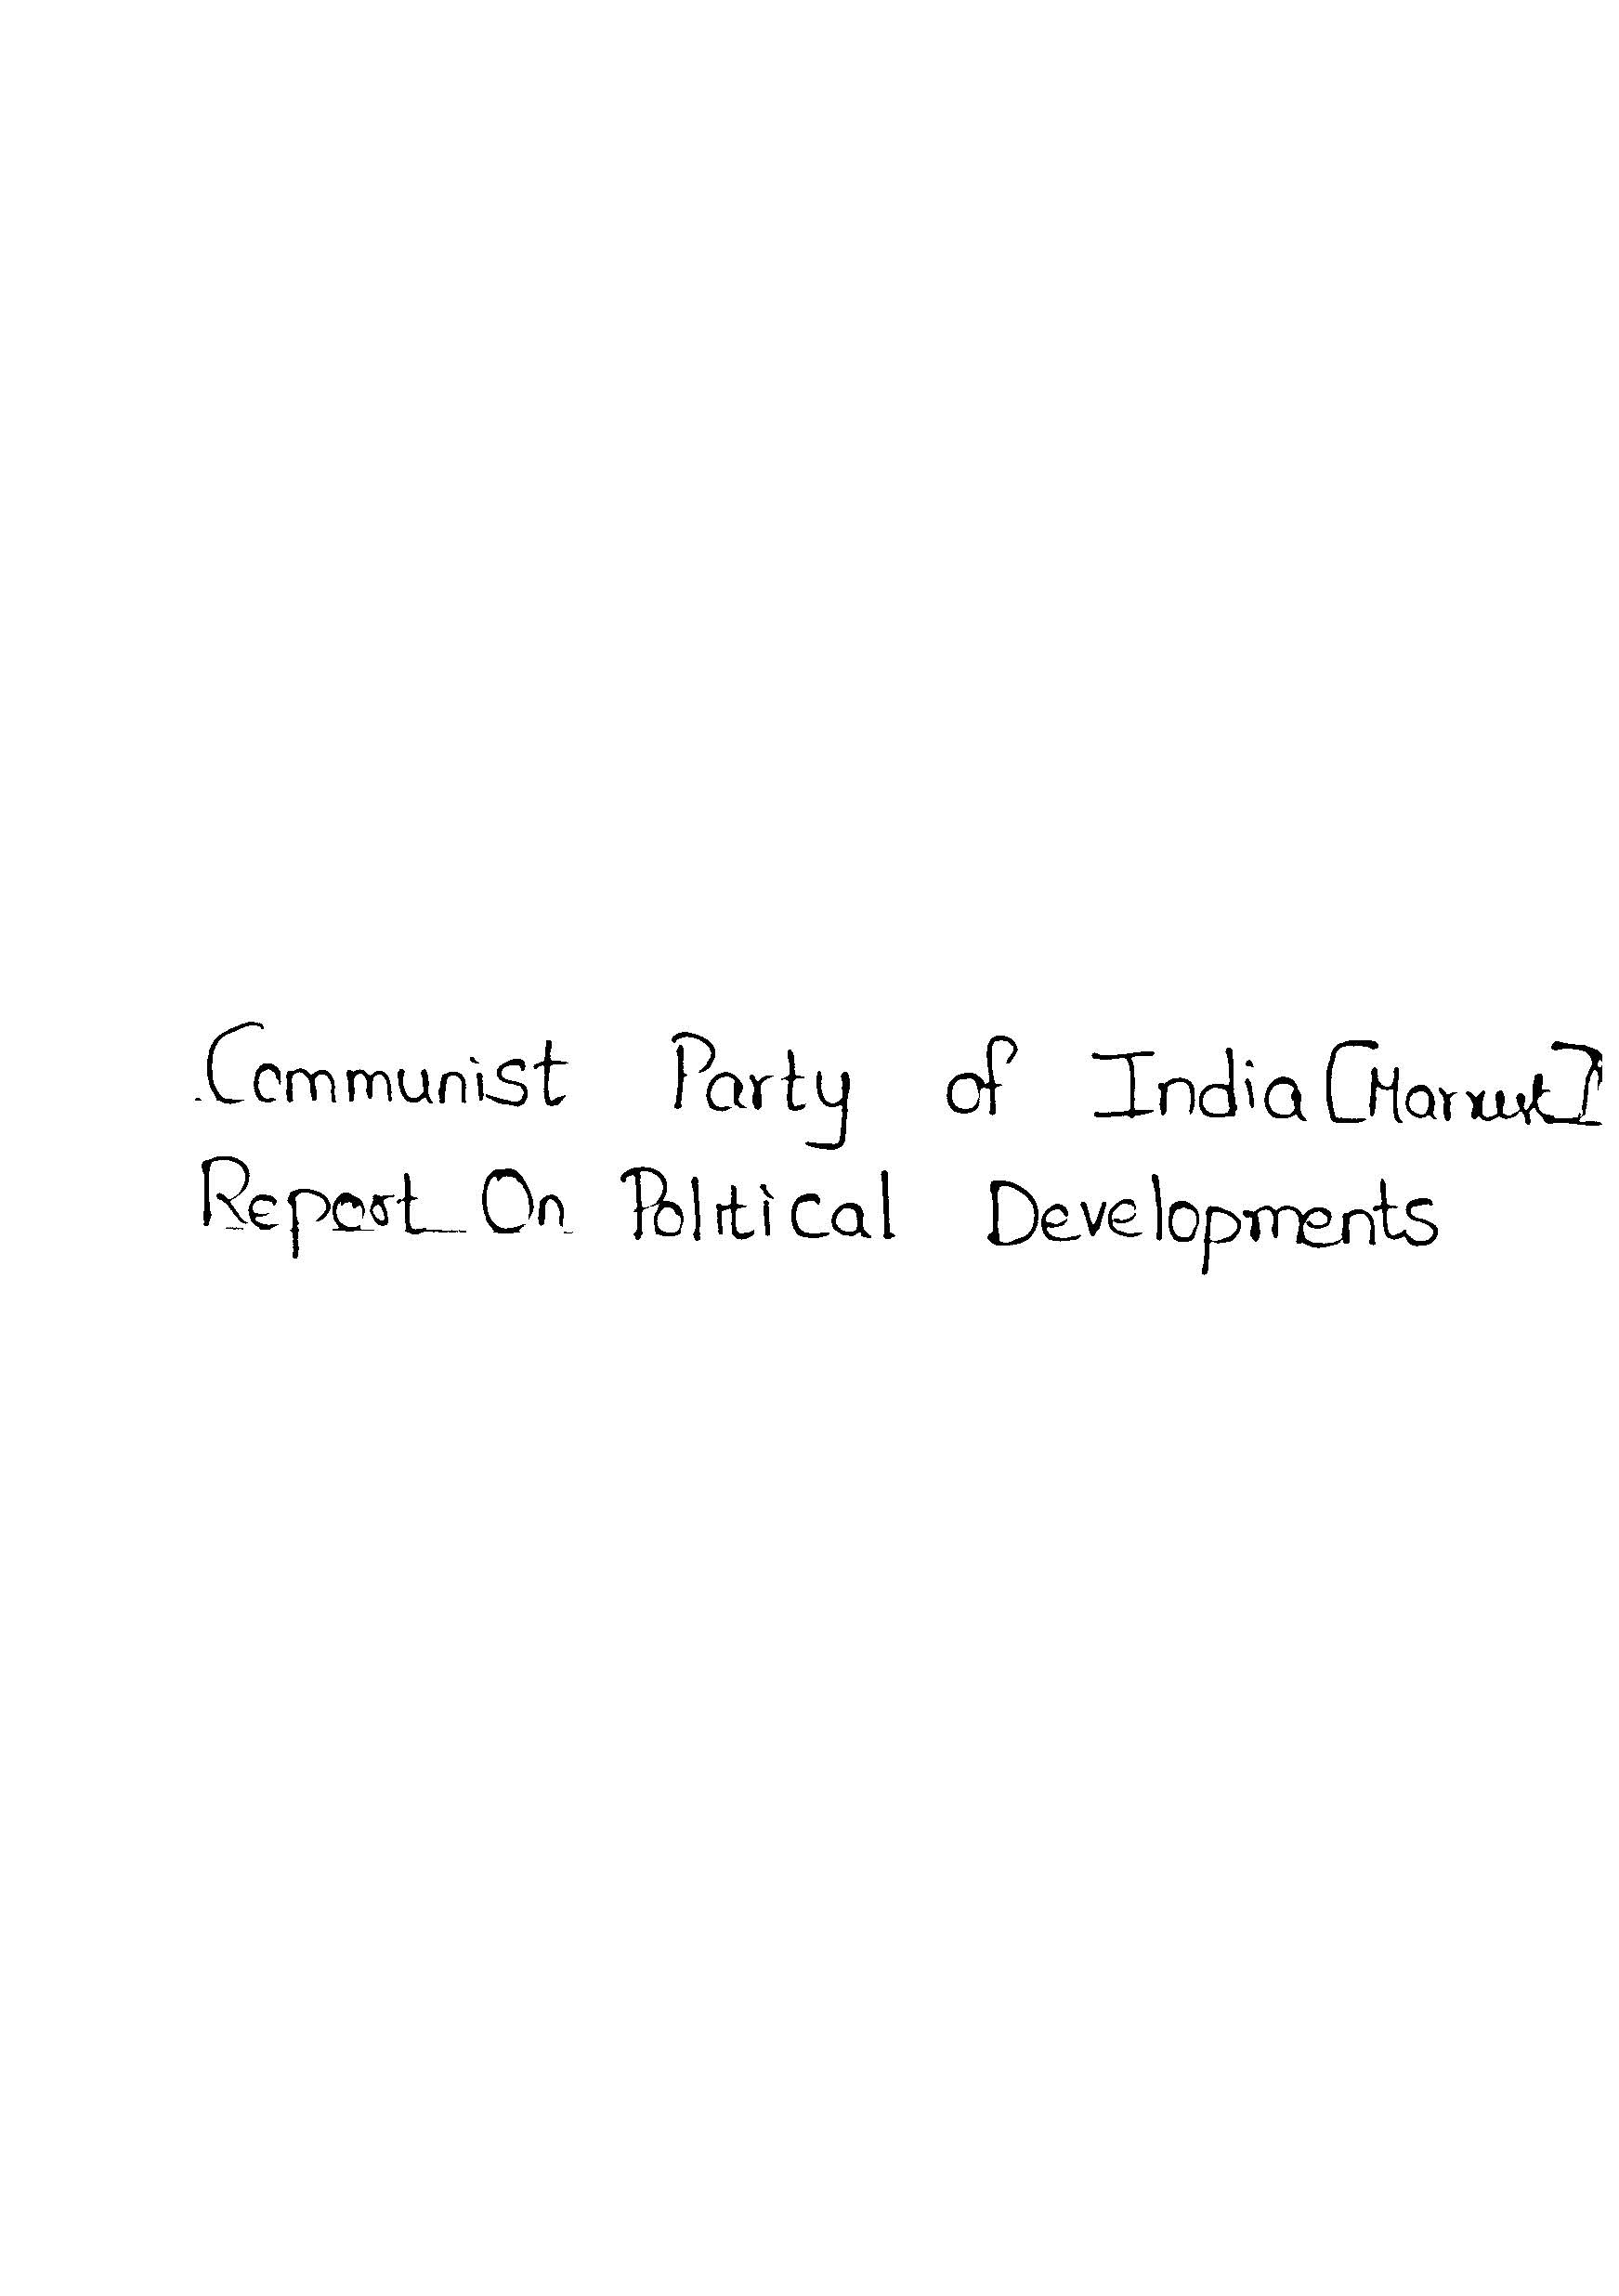 Communist party of india (marxist) report on political developments